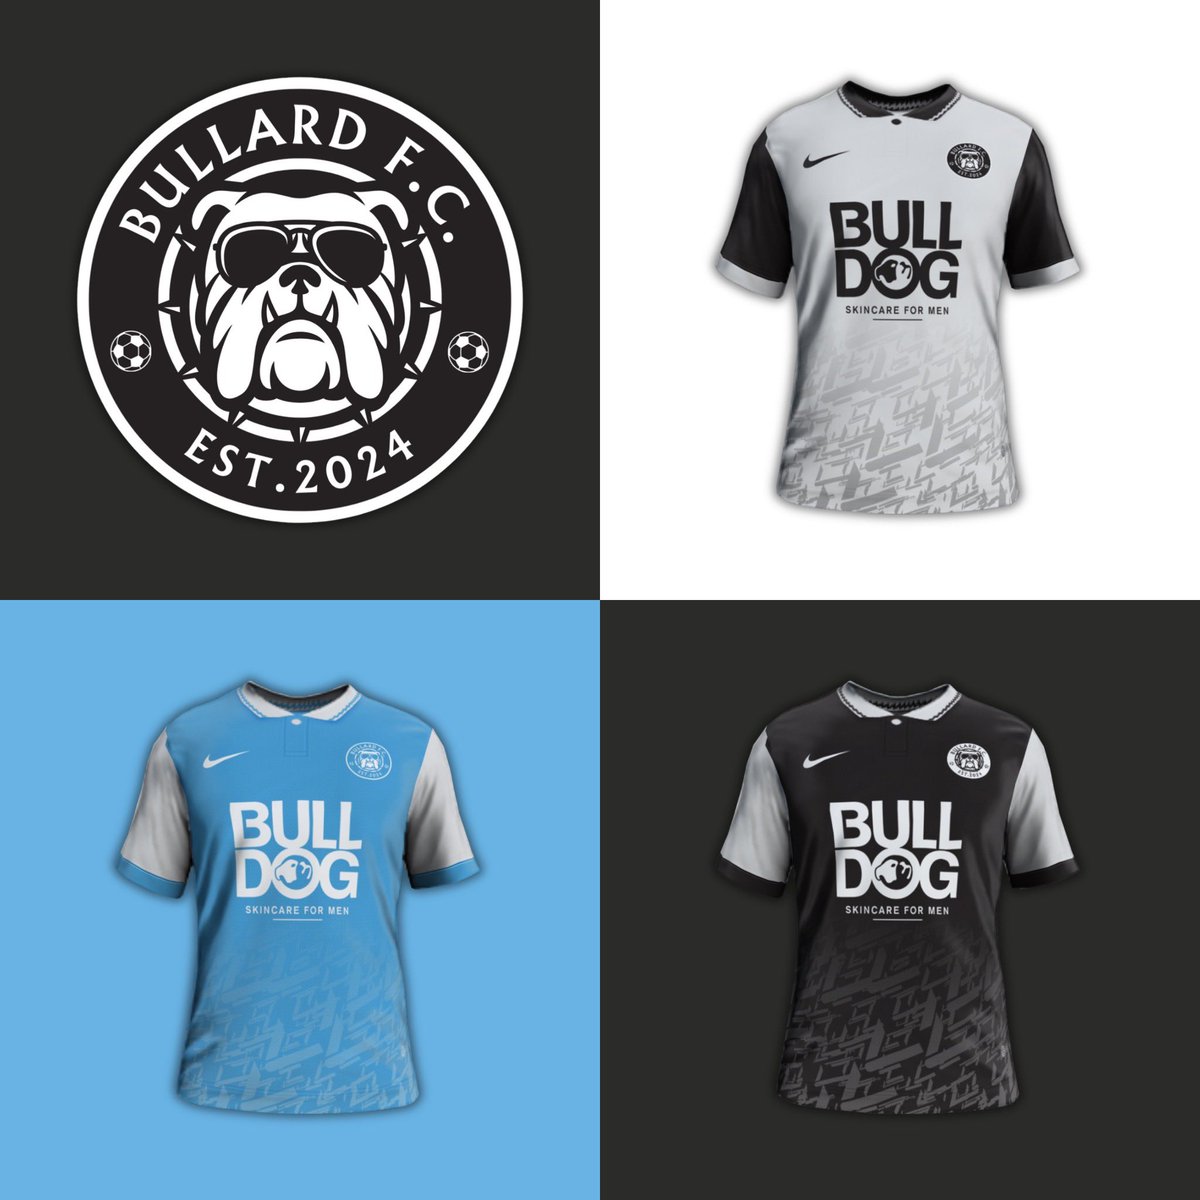 Decided to have a go at creating a logo and set of kits for @FCBullard. Smart and classy is what I went for! 👕 #LogoDesign #KitDesign